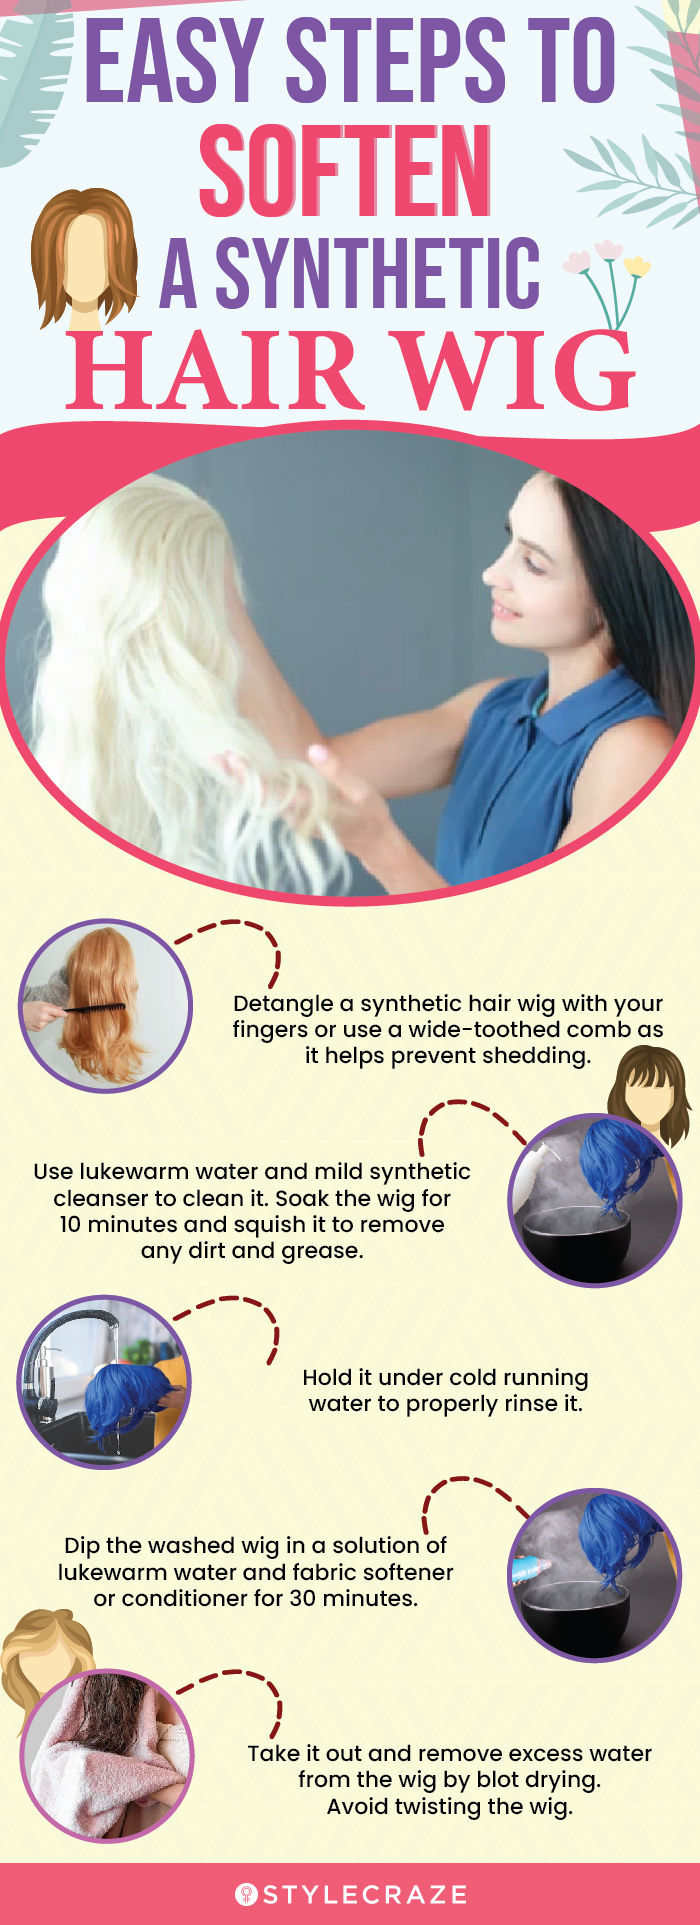 easy steps to soften a synthetic hair wig (infographic)